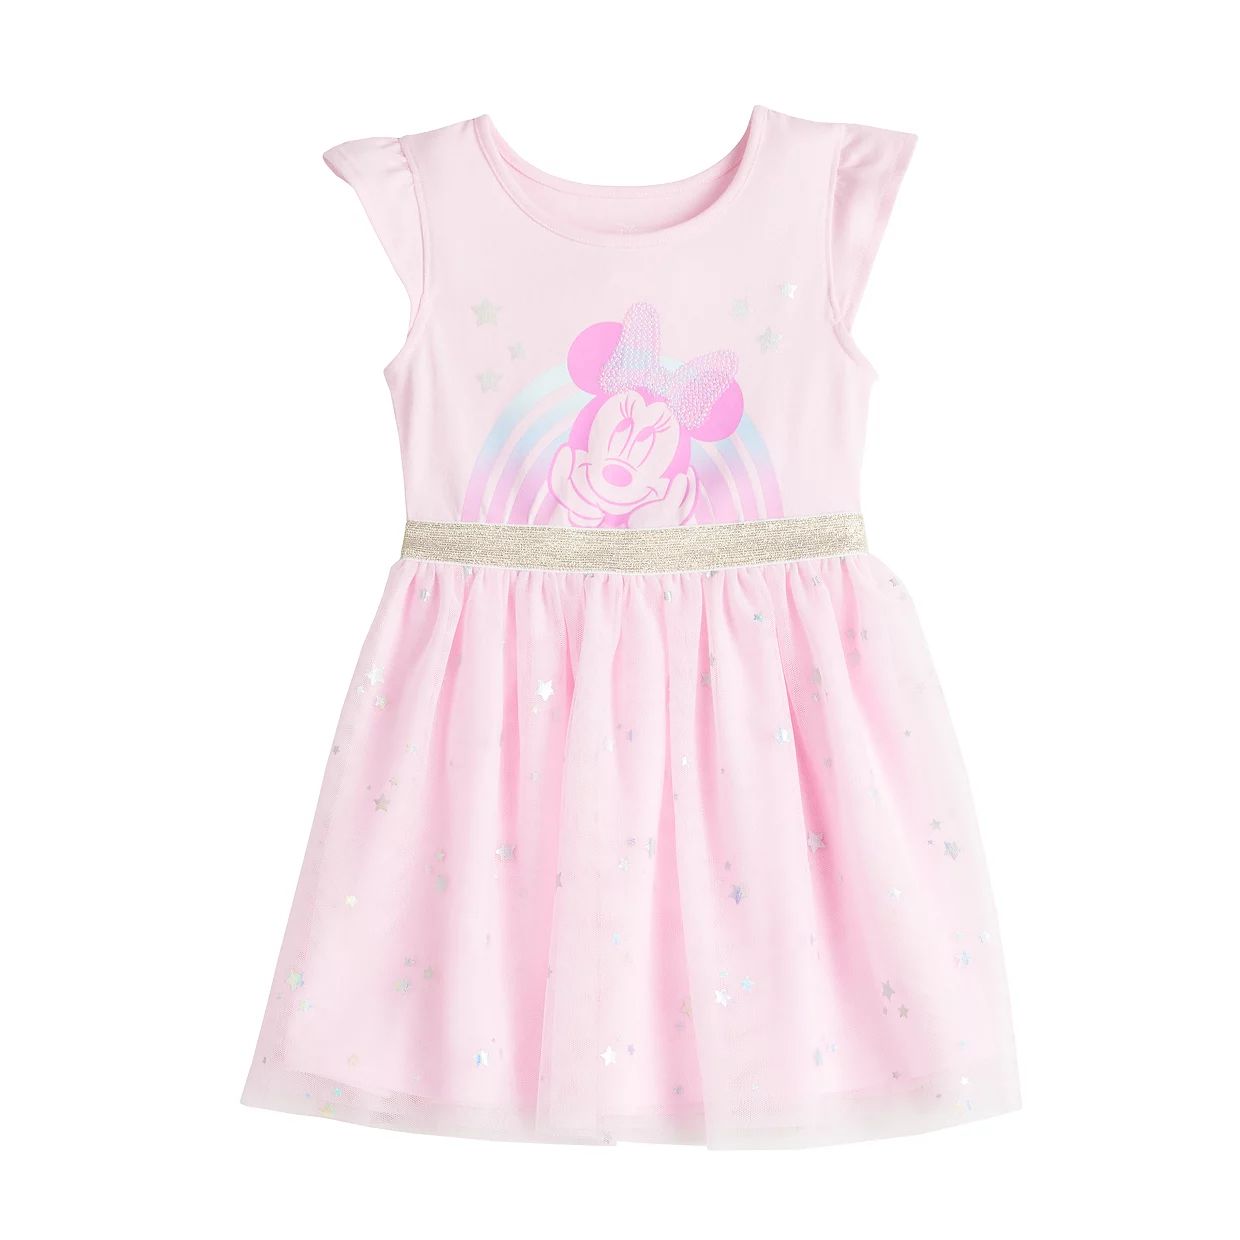 Disney's Minnie Mouse Baby & Toddler Girl Tutu Dress by Jumping Beans® | Kohl's